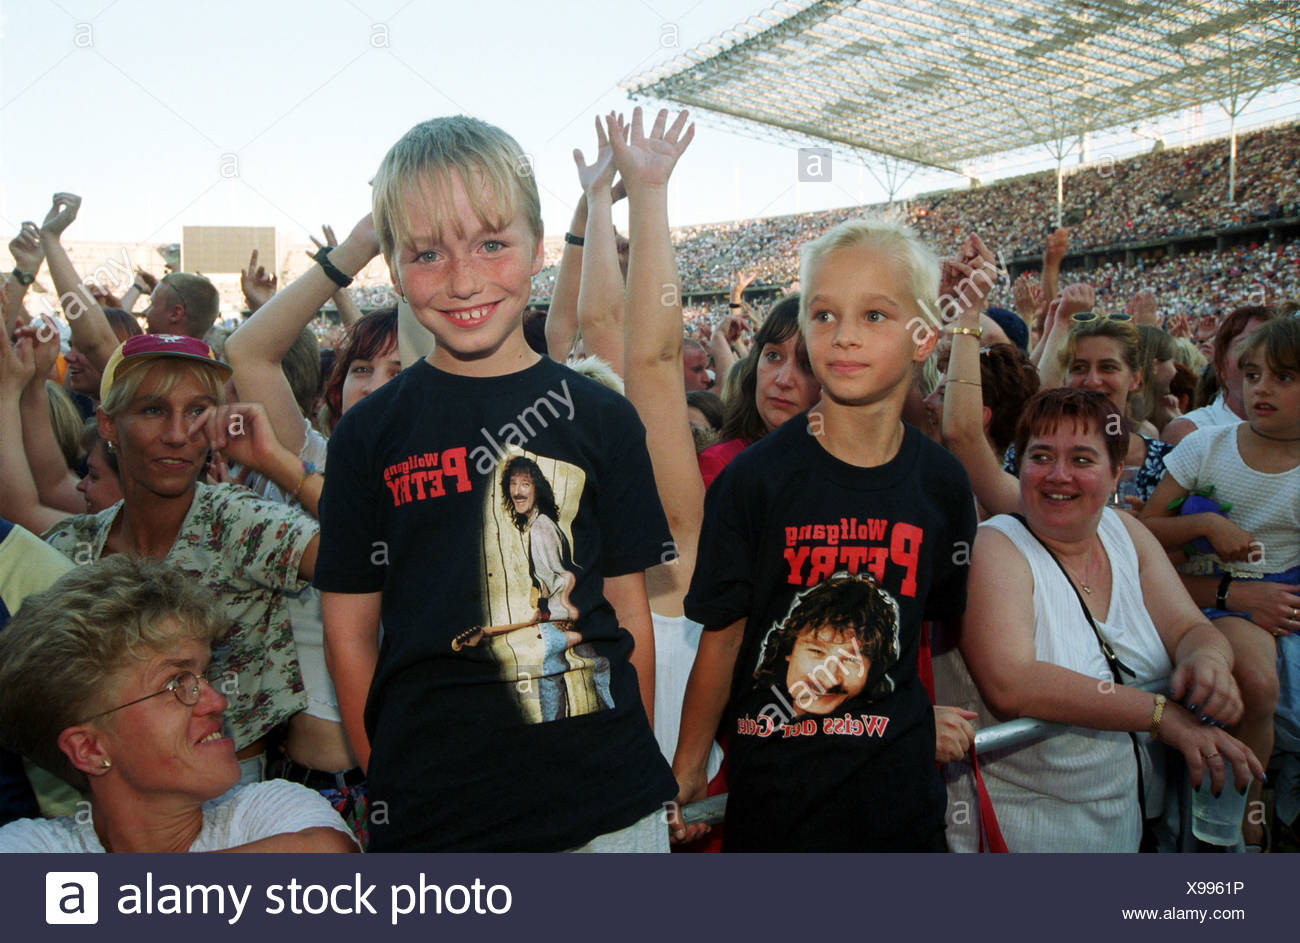 Young Fans At A Concert Wolfgang Petry Berlin Stock Photo Alamy